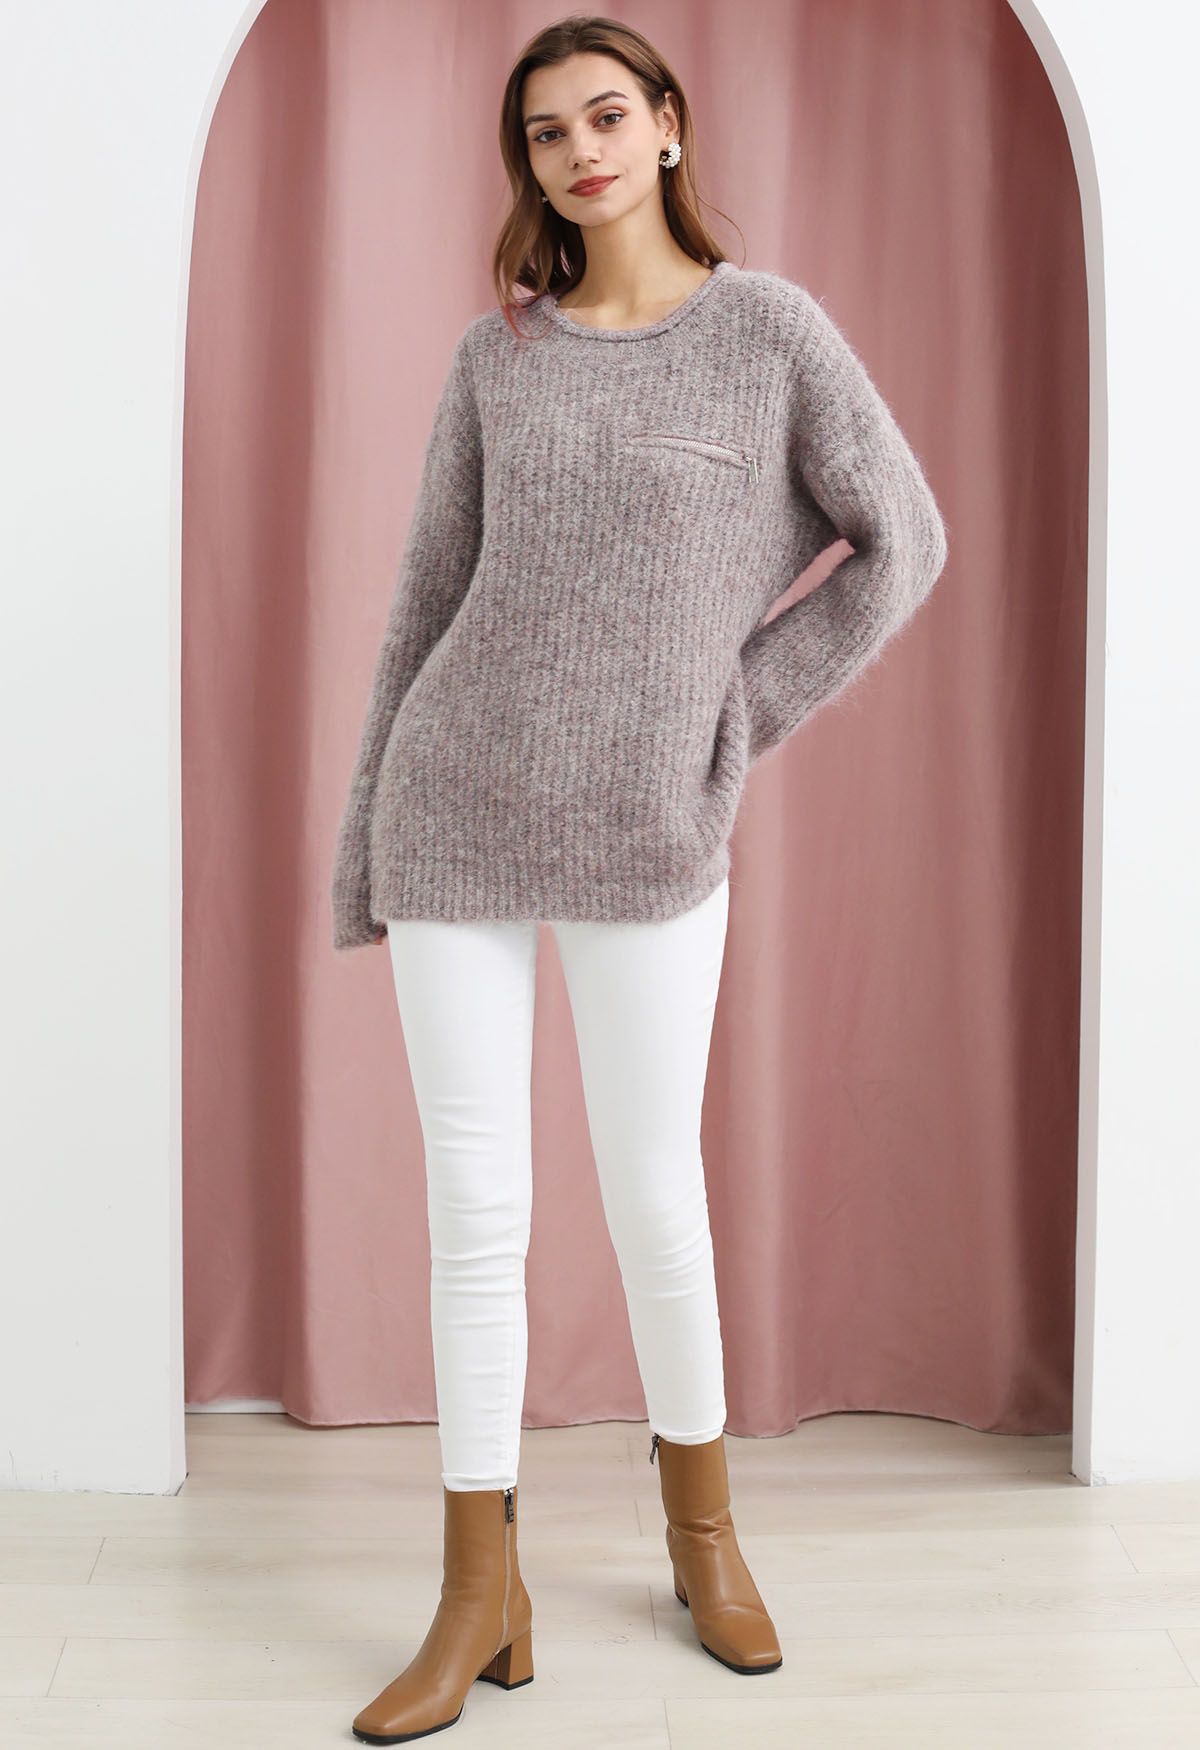 Zipper Decorated Fuzzy Knit Sweater in Oatmeal